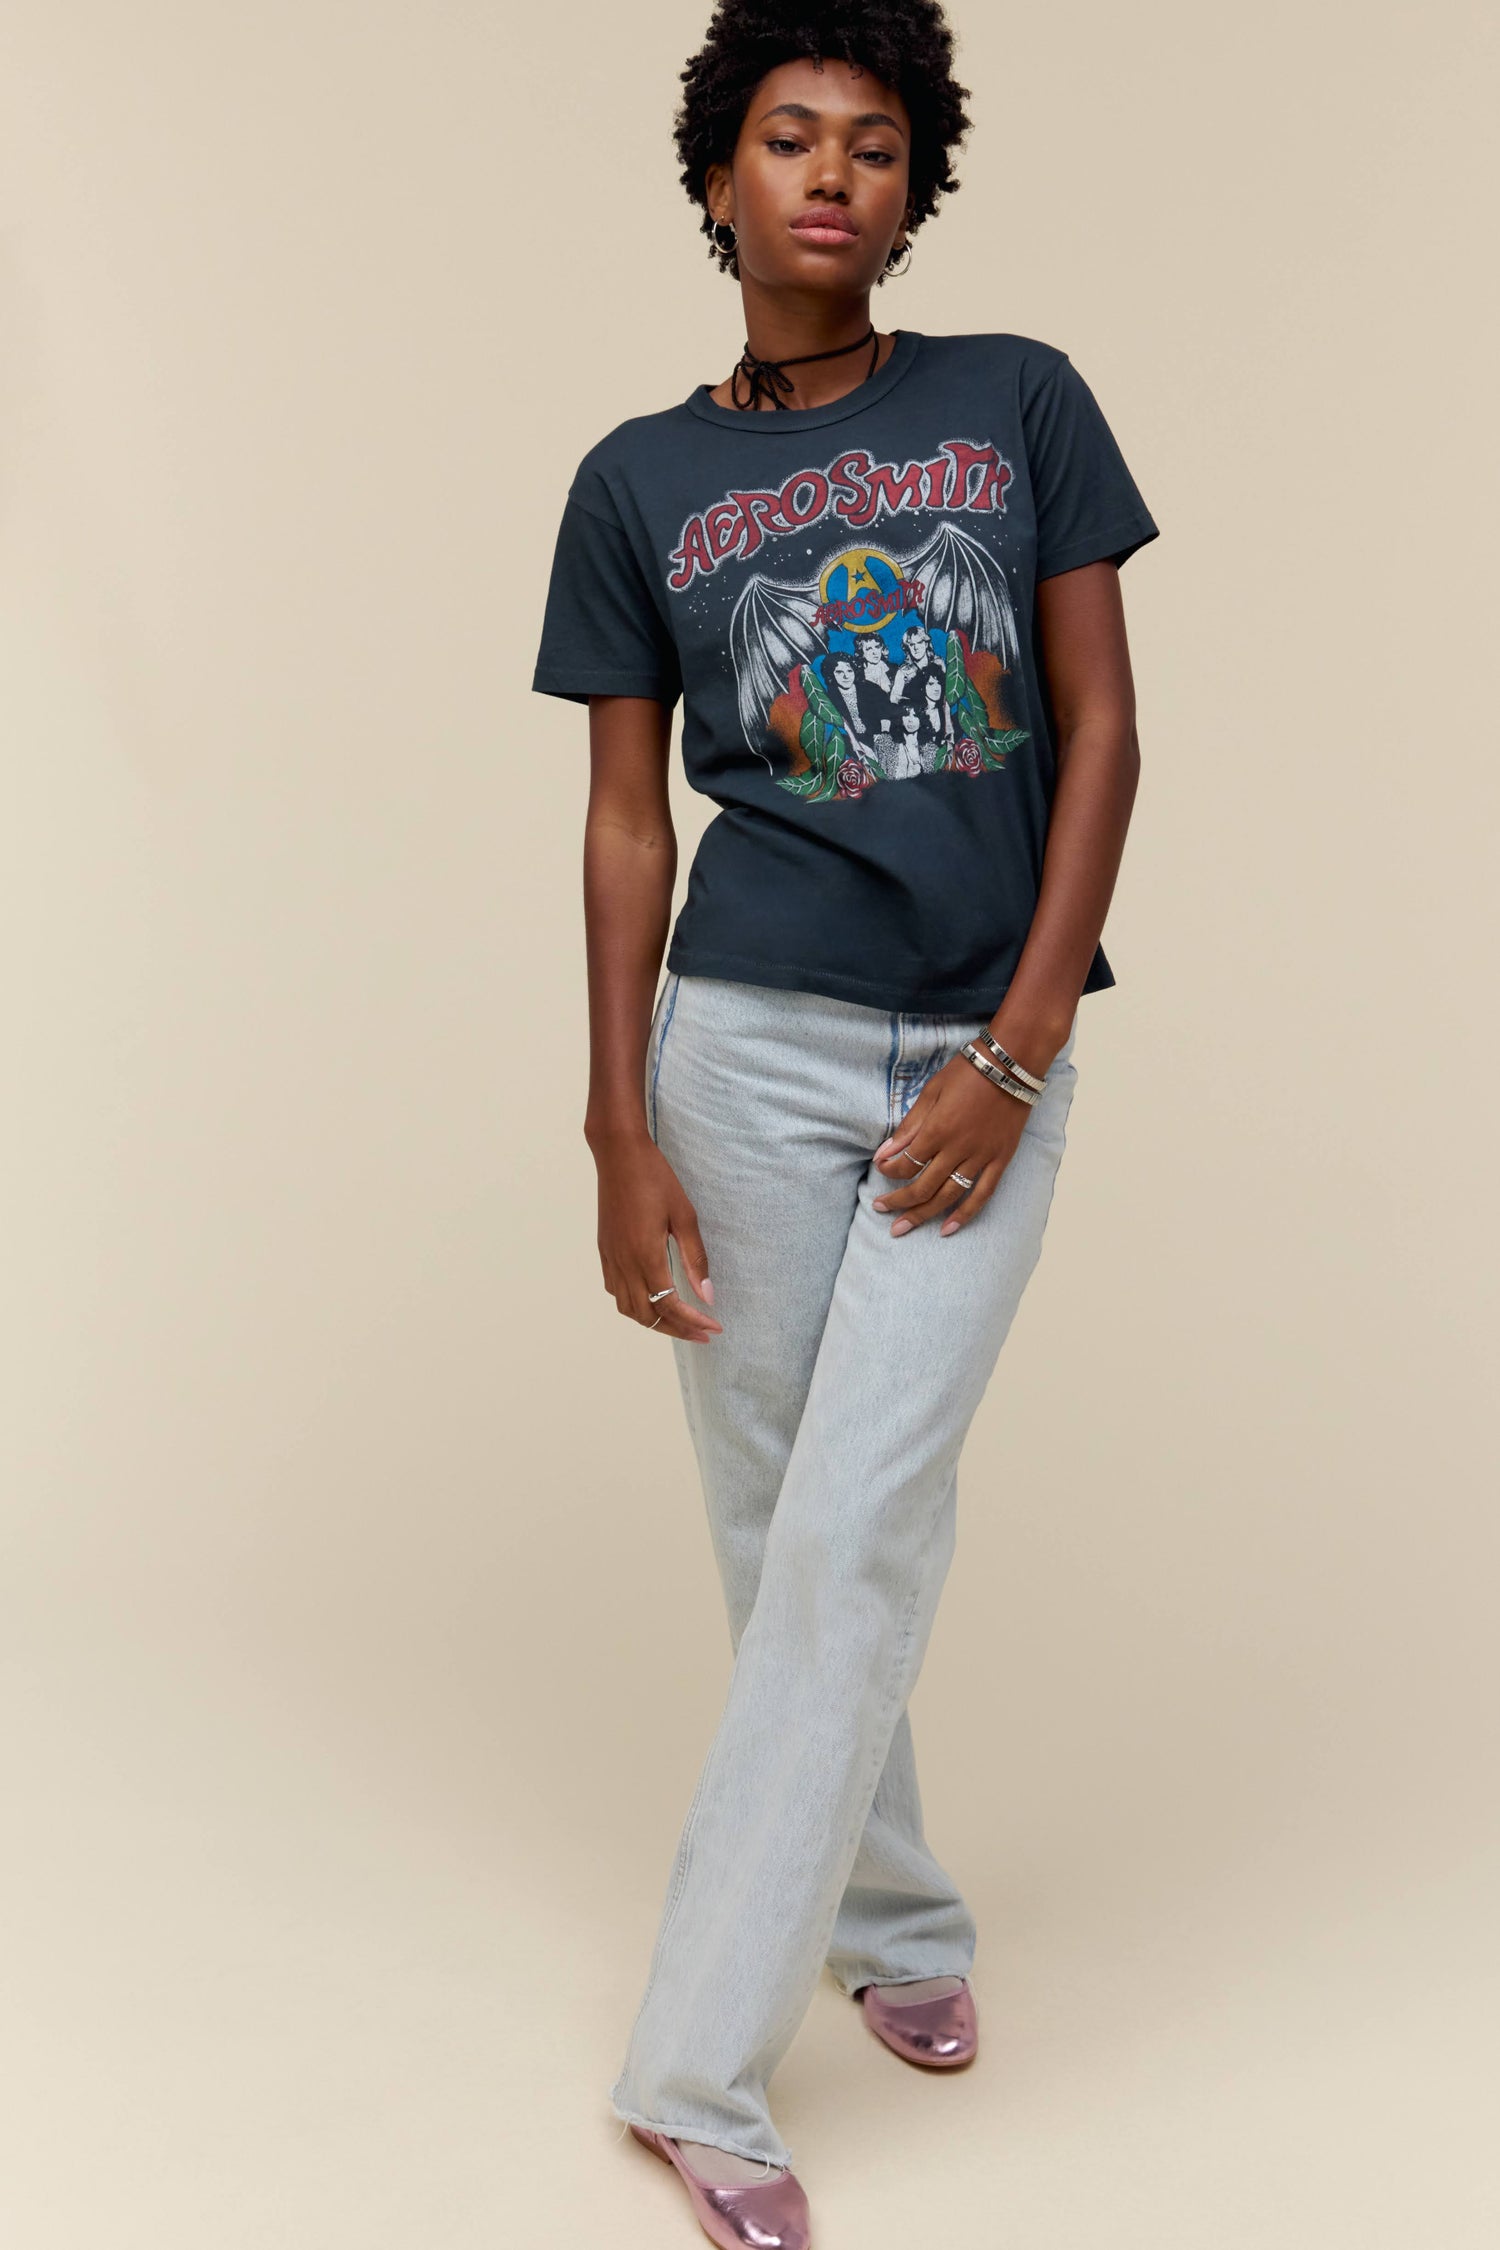 A model featuring a black tee stamped with Aerosmith and a photo of the band in the middle.